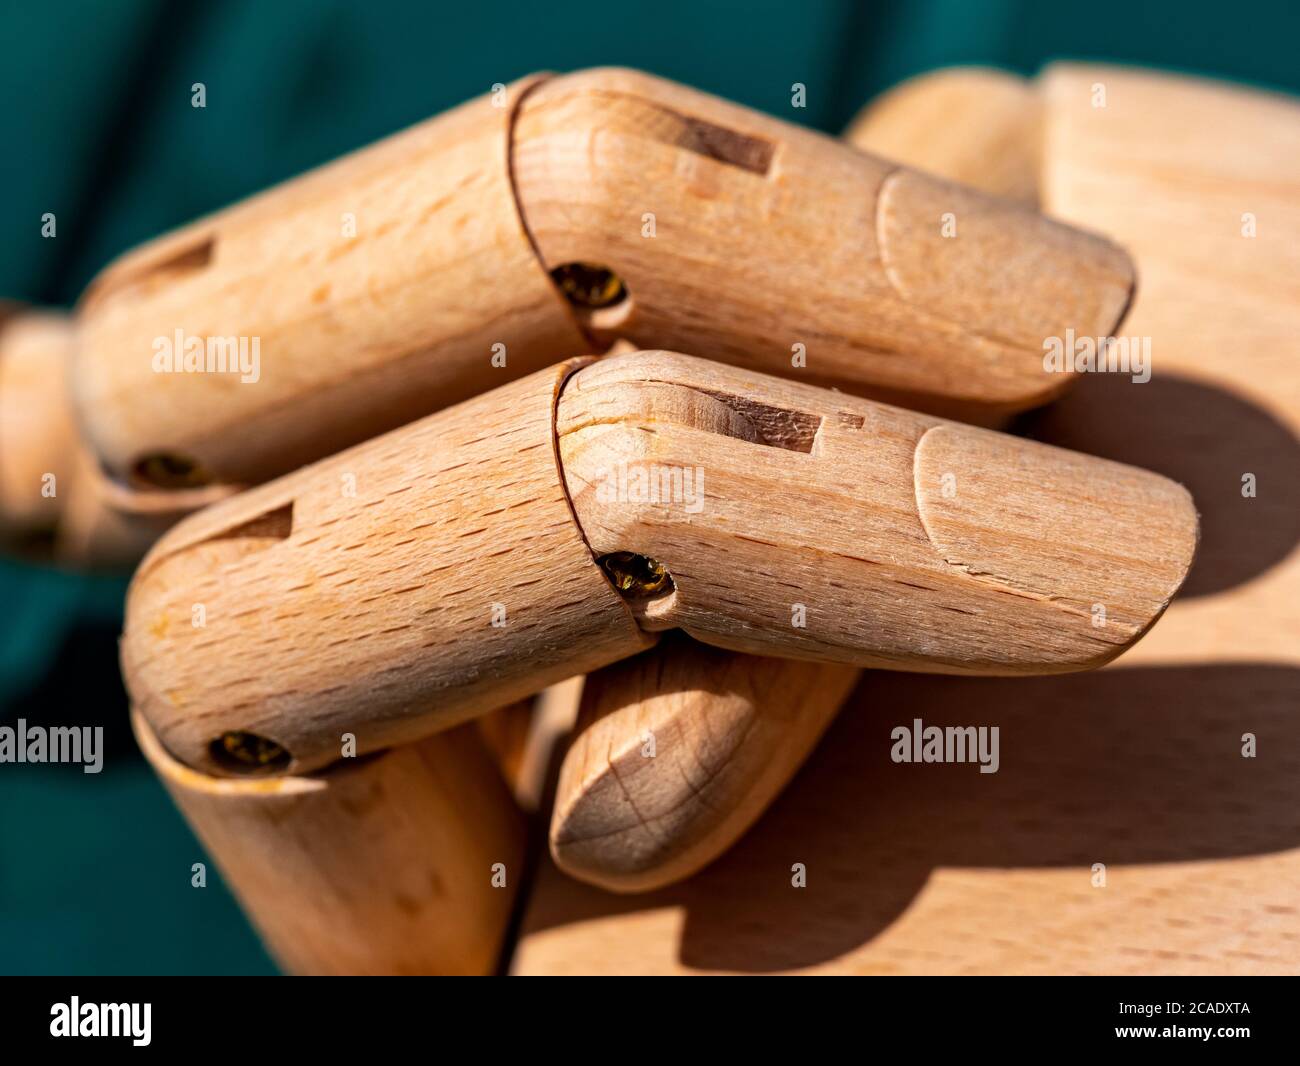 Wooden mannequin hand close-up, showing fingers and thumb on green background Stock Photo